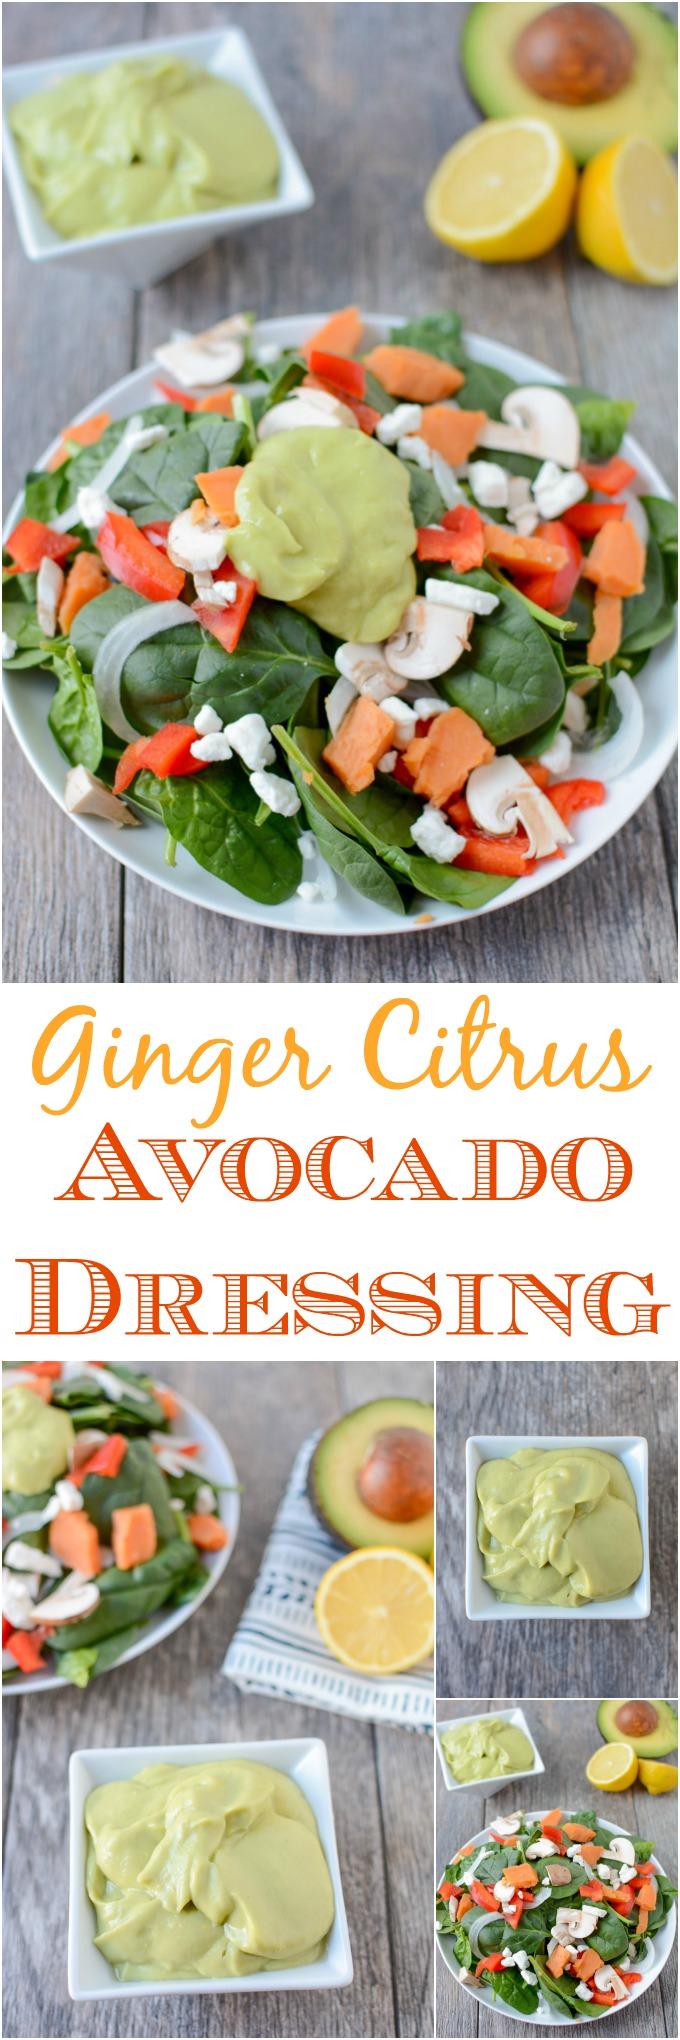 Thick, creamy & flavorful, this Ginger Citrus Avocado Dressing recipe will take your salad to the next level. It's gluten-free, vegan, paleo & ready in minutes!